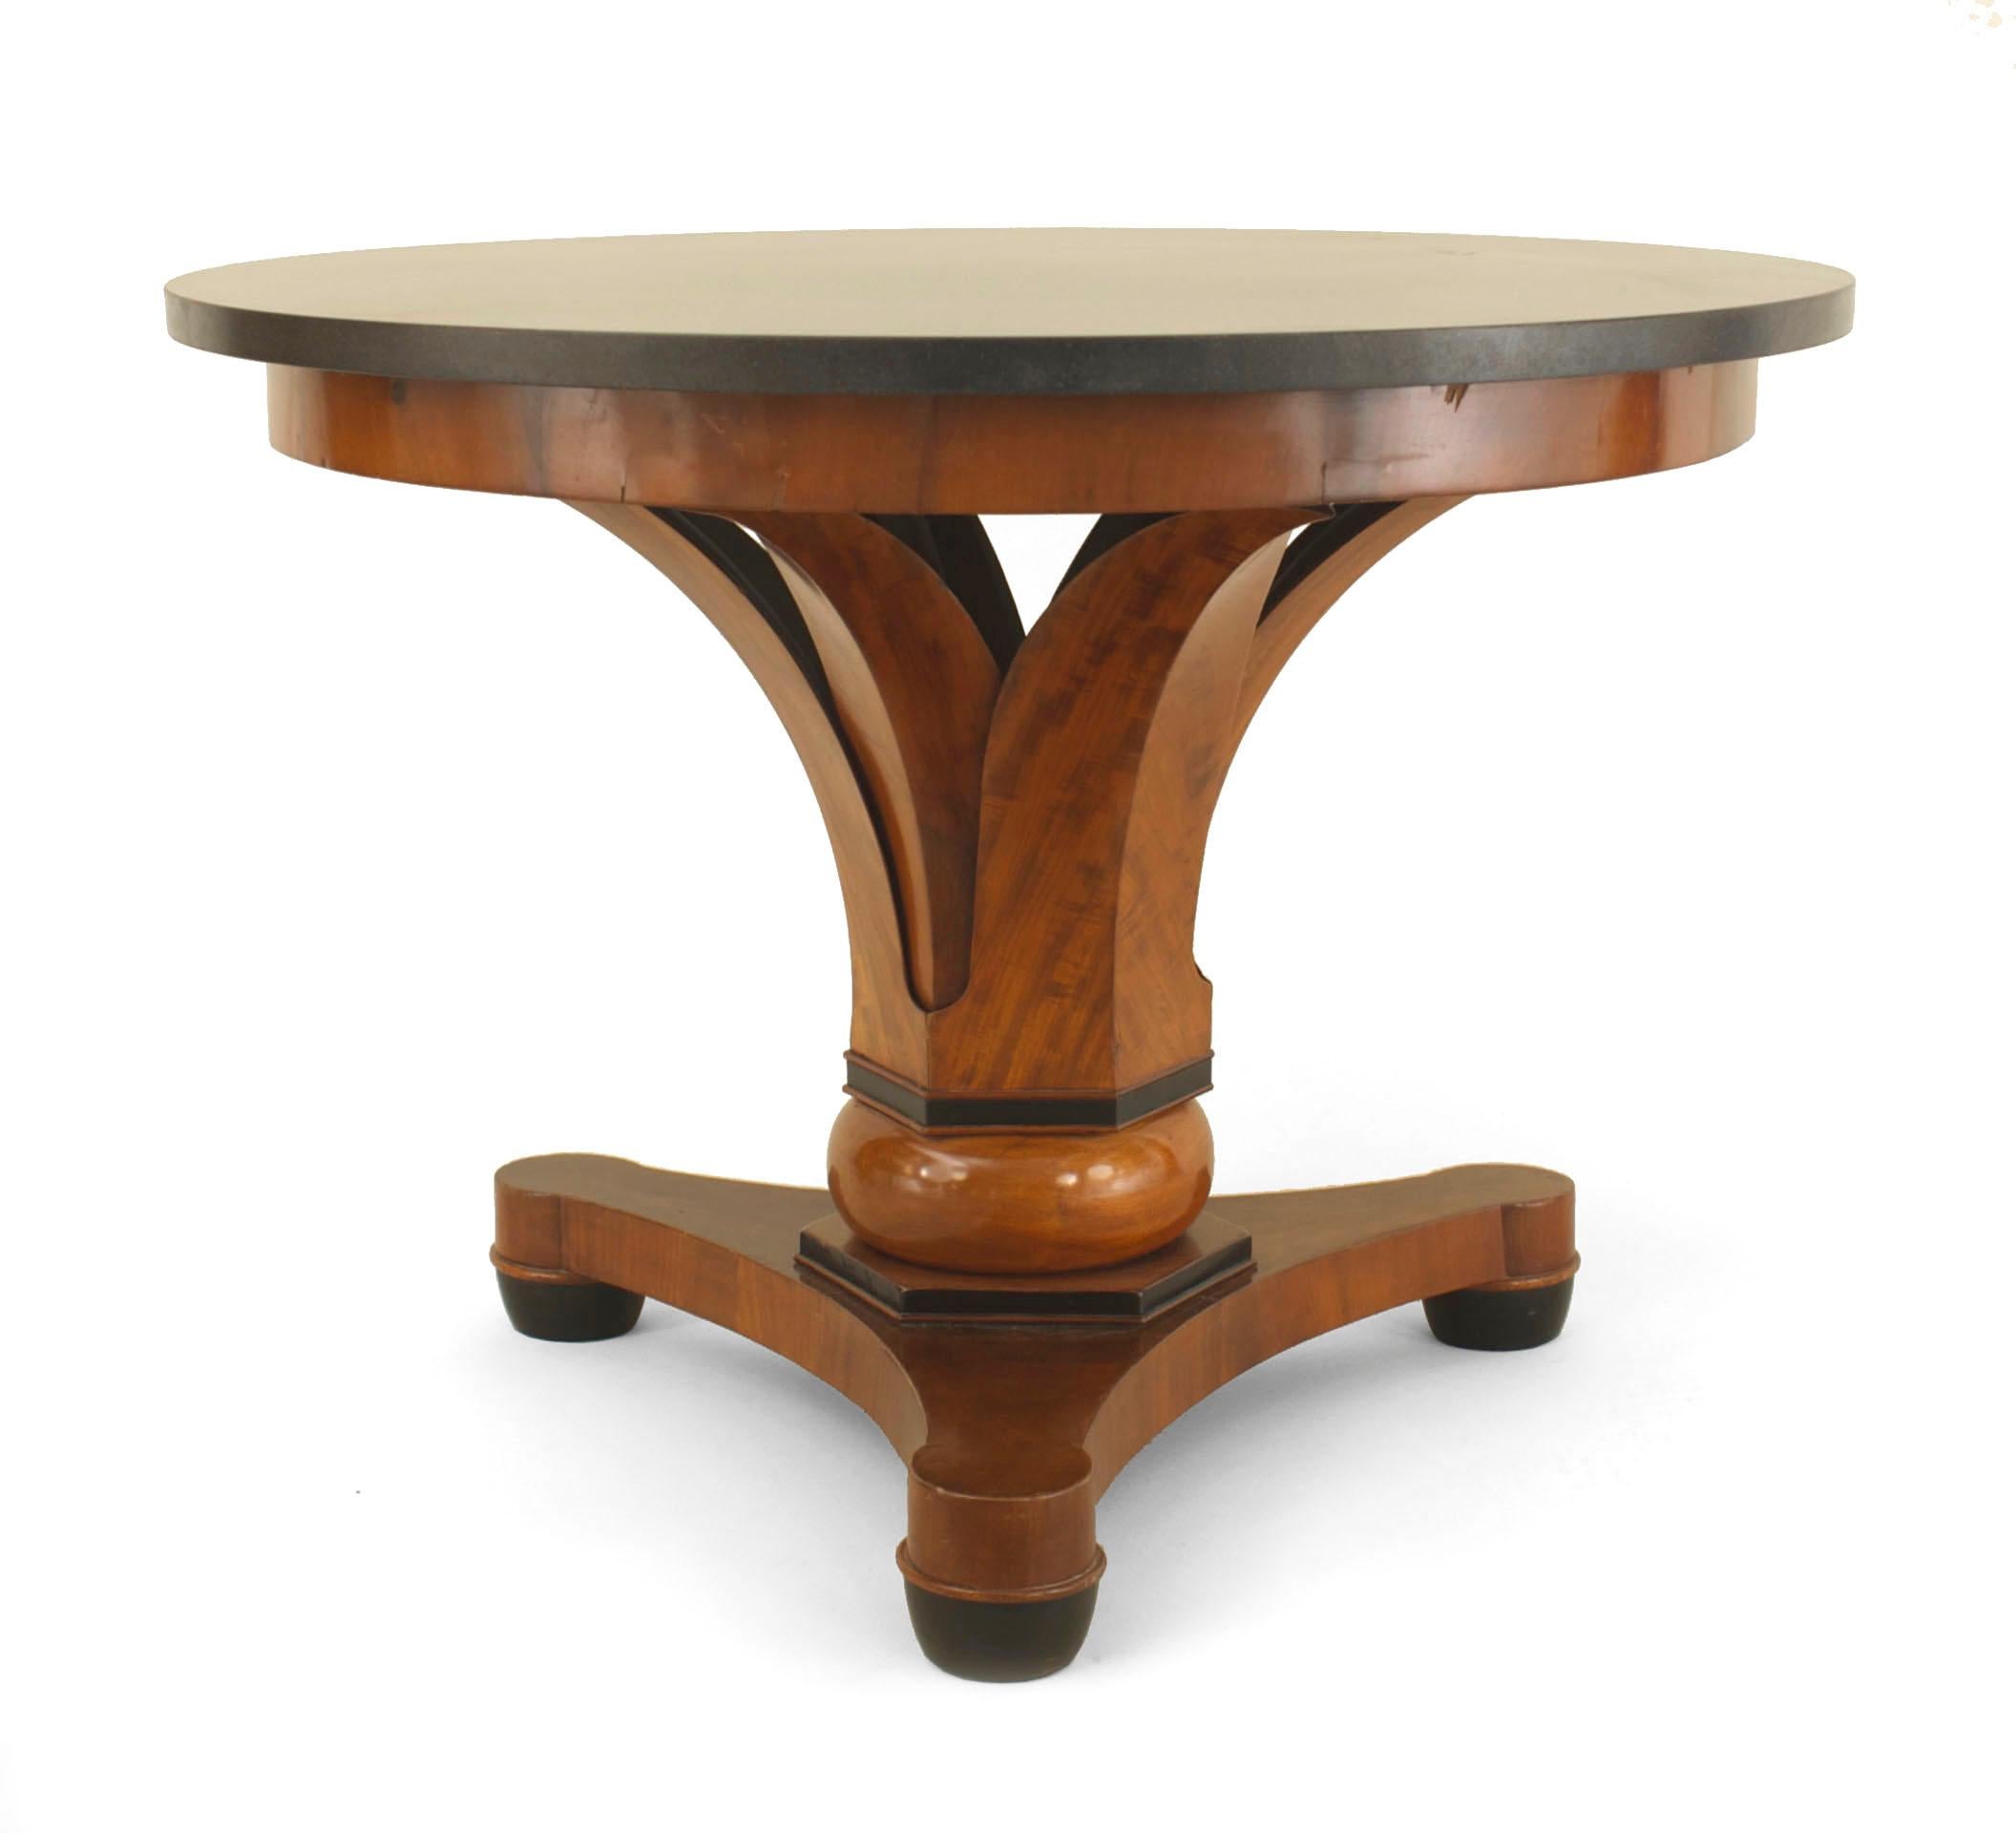 Austrian Biedermeier (circa 1830) black round marble topped mahogany center table having a palm leaf support over a tripartite base on padded feet.
